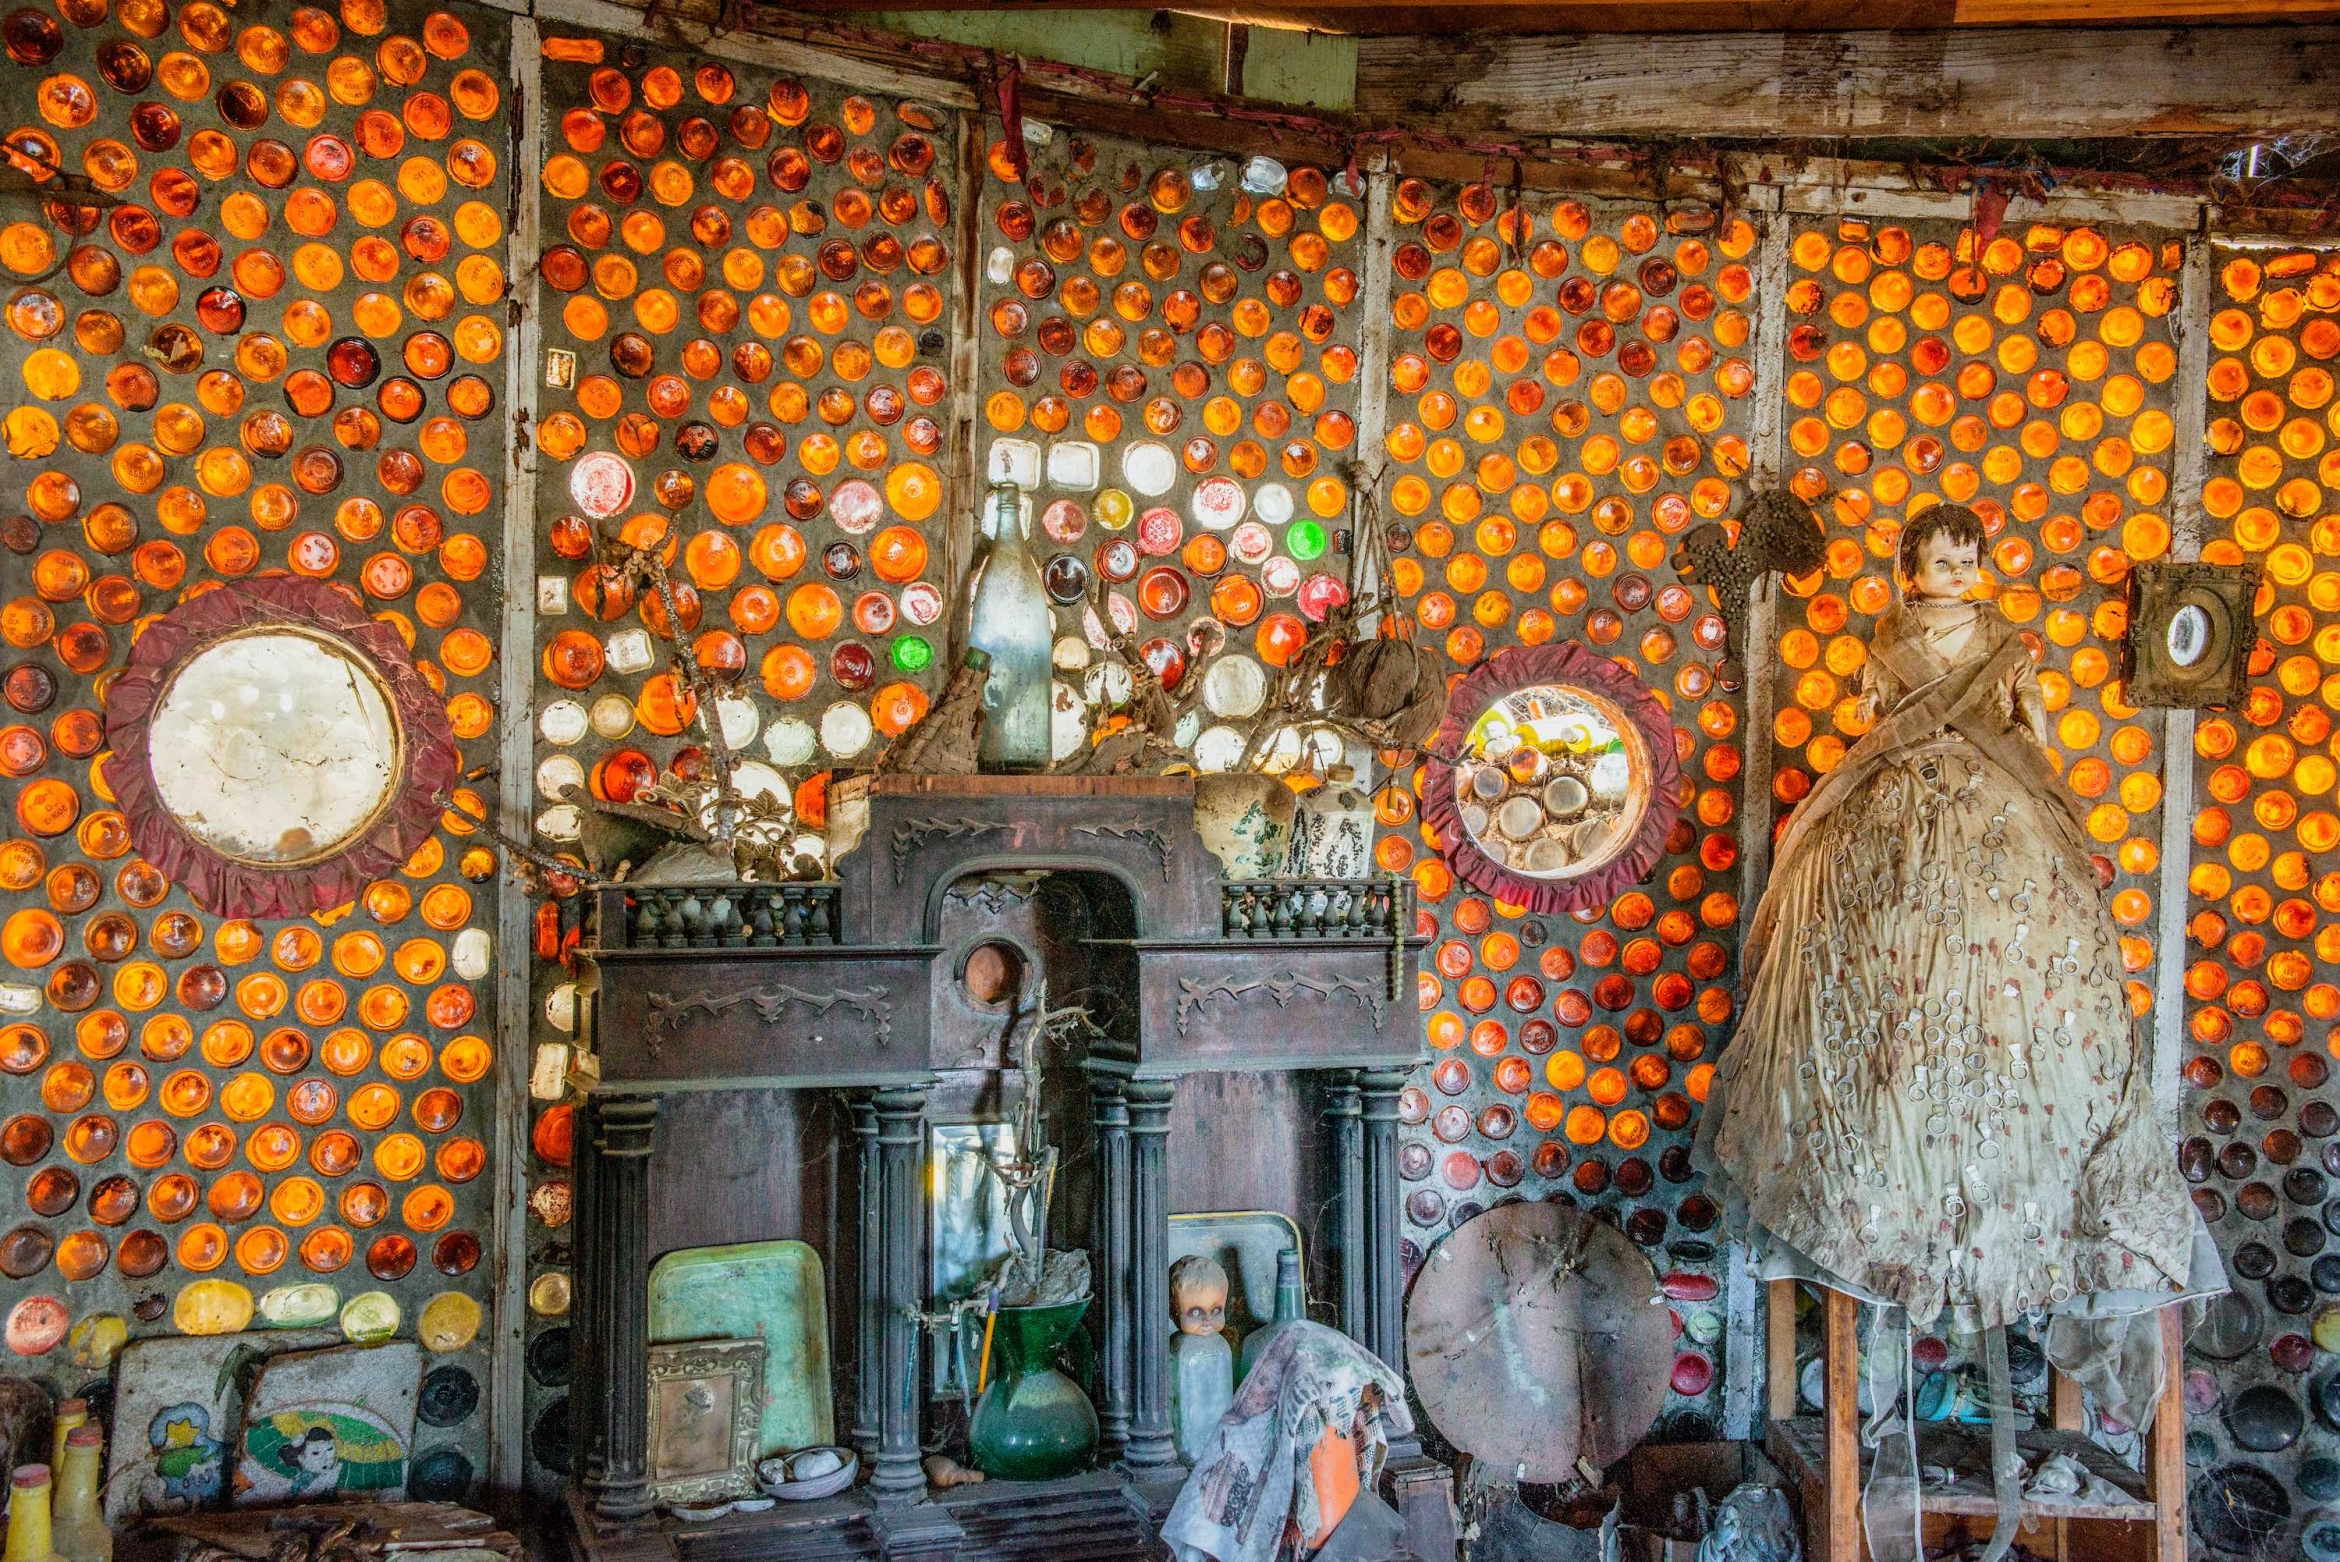 Orange glass bottle mosaic structure with dolls and miscellanea 